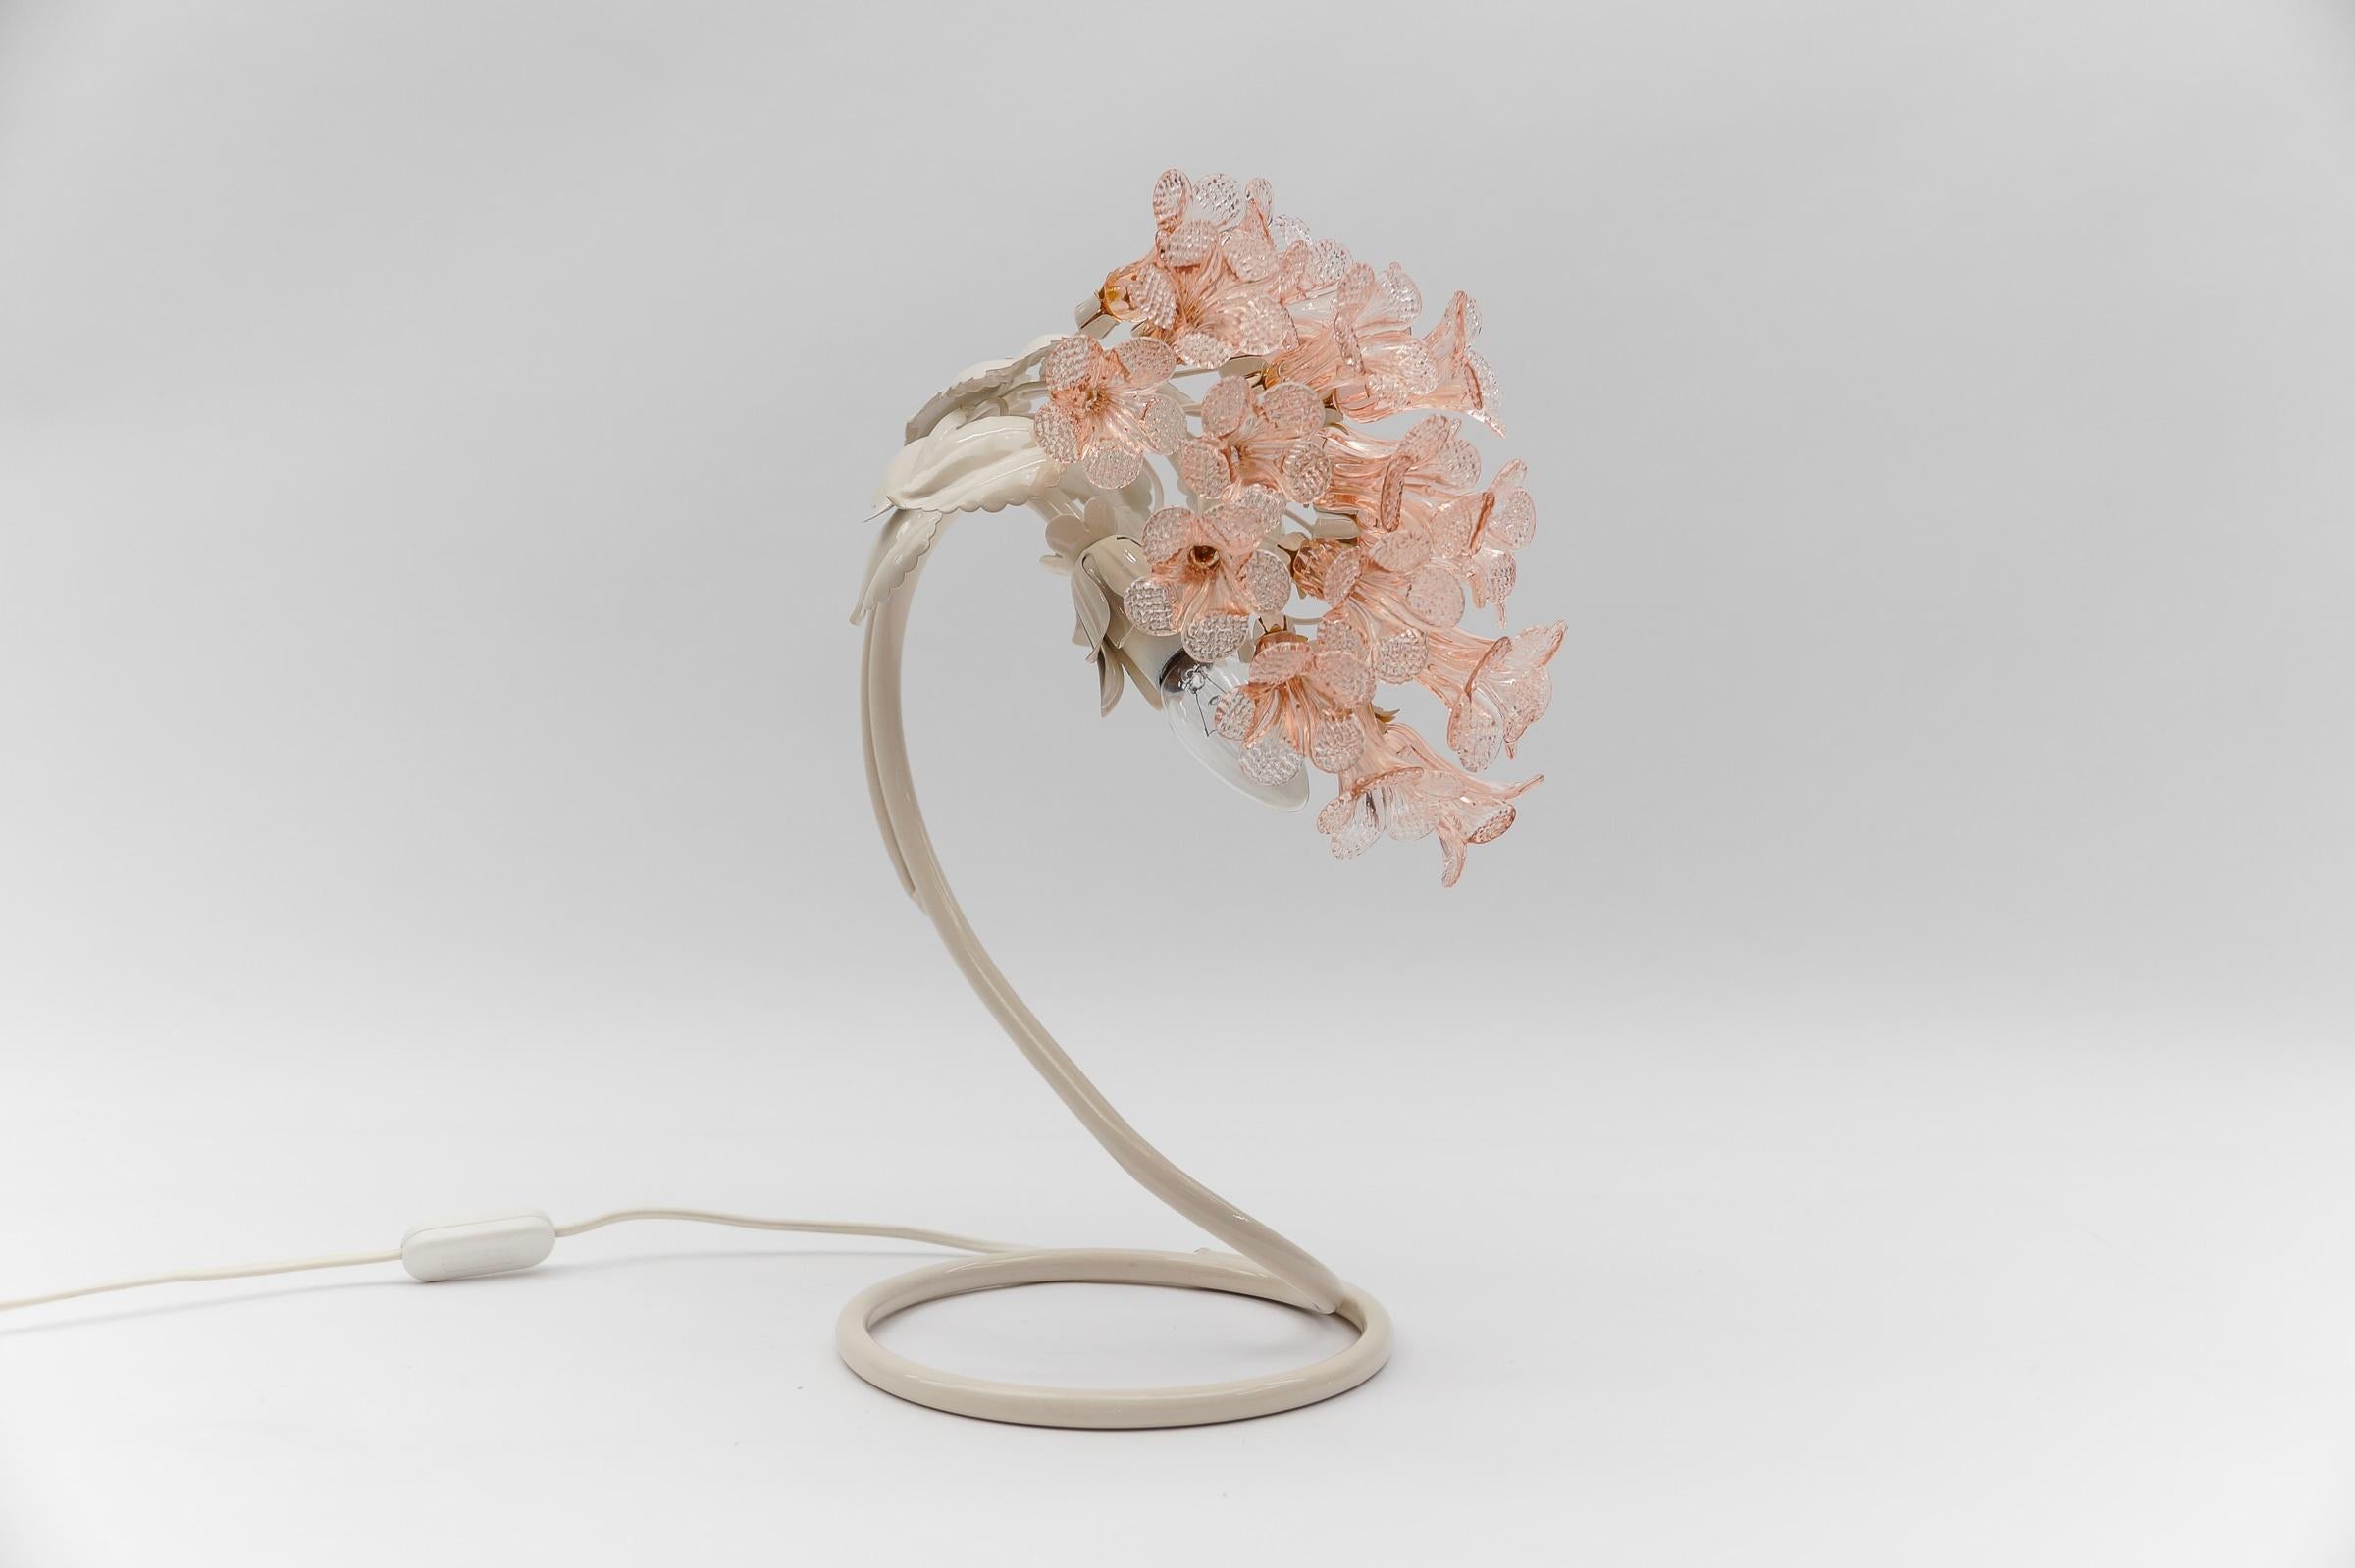 Italian Modern Table Lamp made in Pink Murano Glass Flowers, 1960s Italy For Sale 1